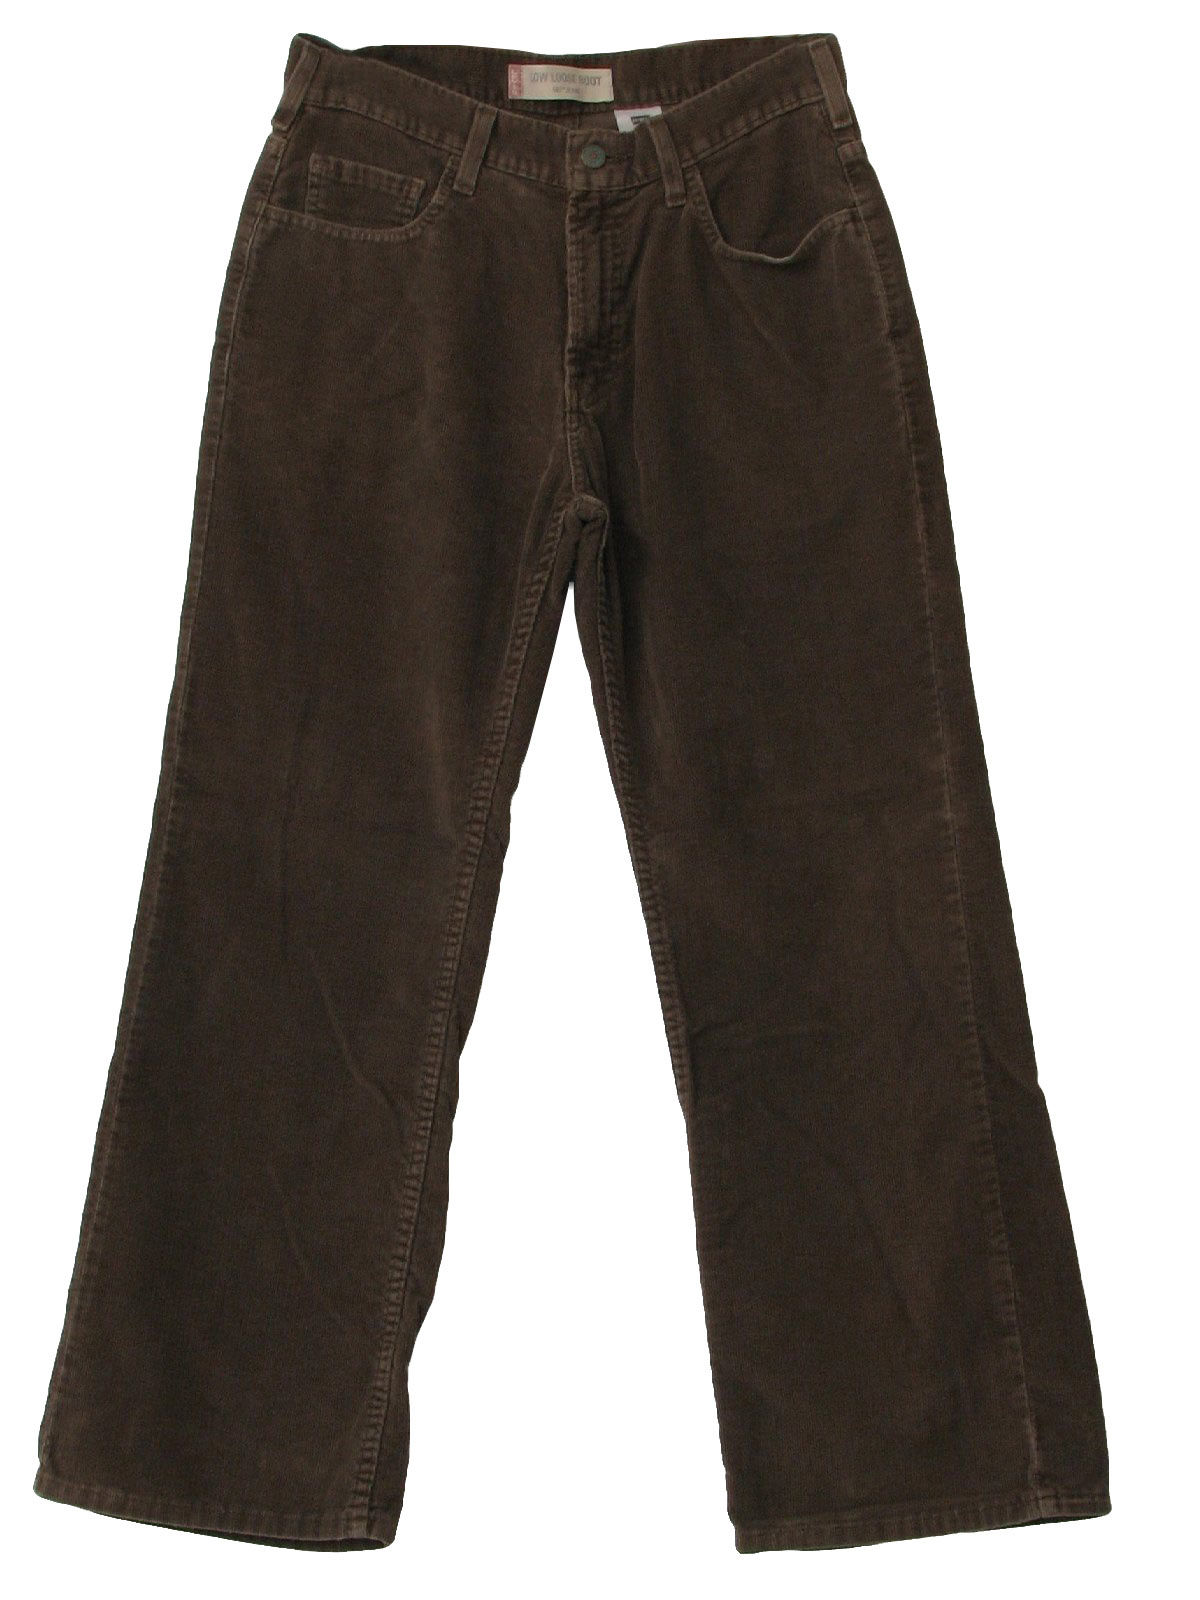 90s Vintage Levis 567 Pants: 90s -Levis 567- Mens medium brown well worn  polyester and cotton jeans cut corduroy pants with low, loose, boot cut  styling, classic four pocket cut and button/zip